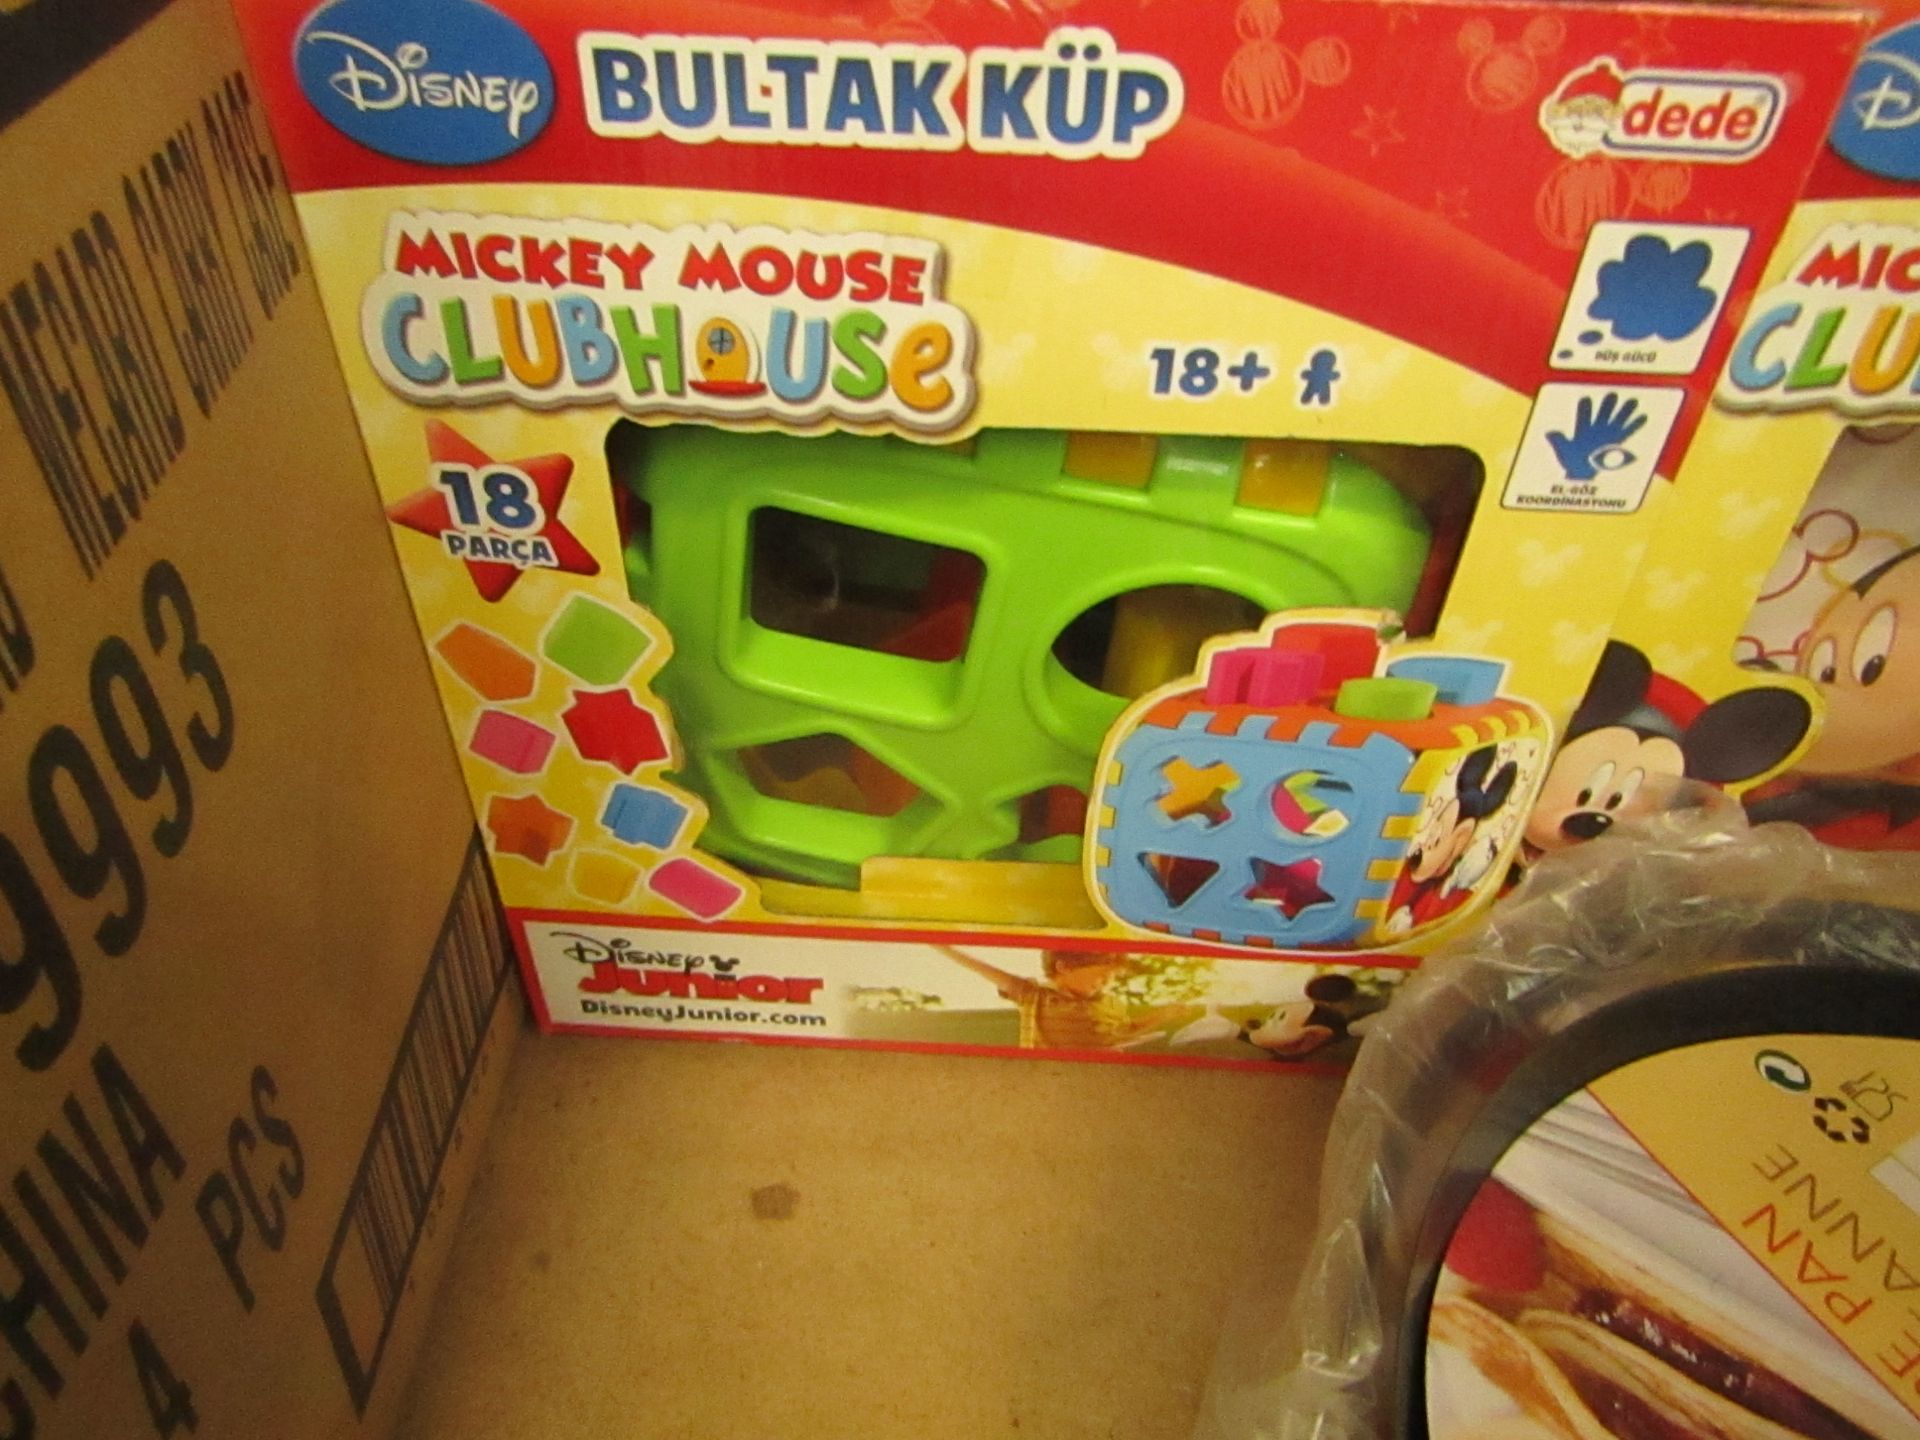 Mickey Mouse club House Shape Sorter Cubes, look unused but the packaging has a few creases and